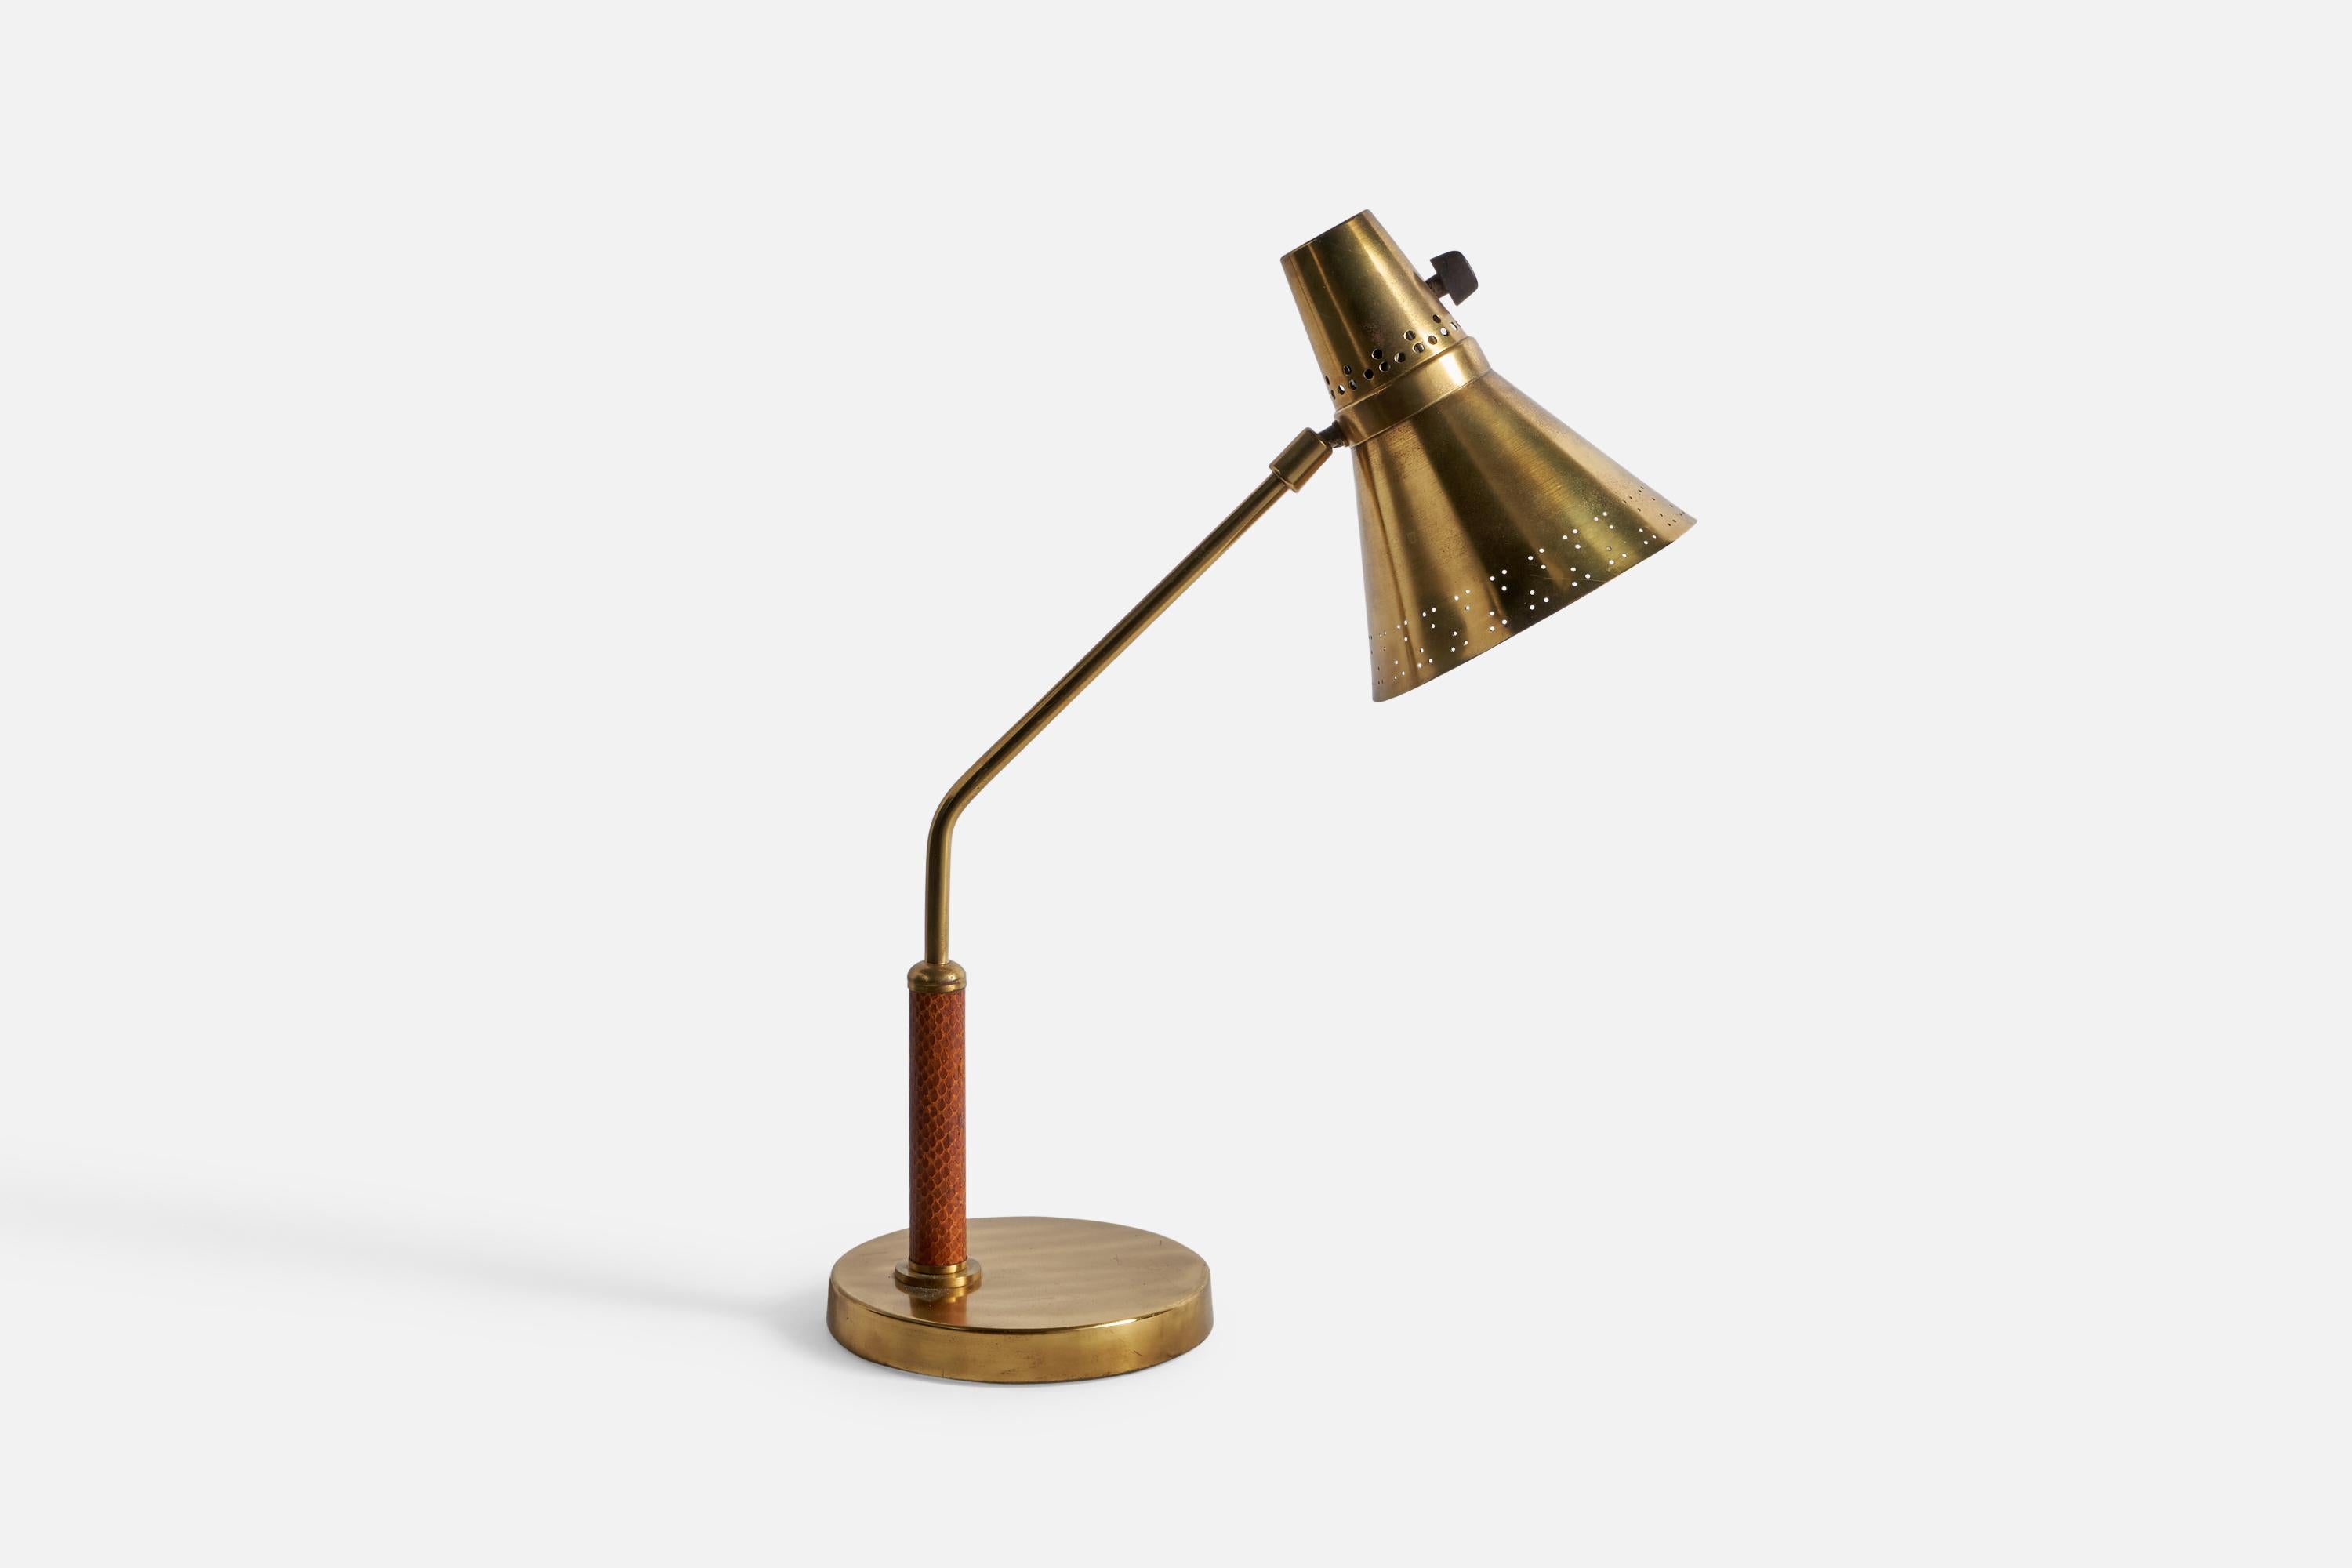 An adjustable brass and impressed leather table lamp designed and produced by E Hansson & Co, Malmö, Sweden, 1950s.

Overall Dimensions (inches): 18” H x 6.05” W x 14.1” D
Bulb Specifications: E-26 Bulb
Number of Sockets: 1
All lighting will be